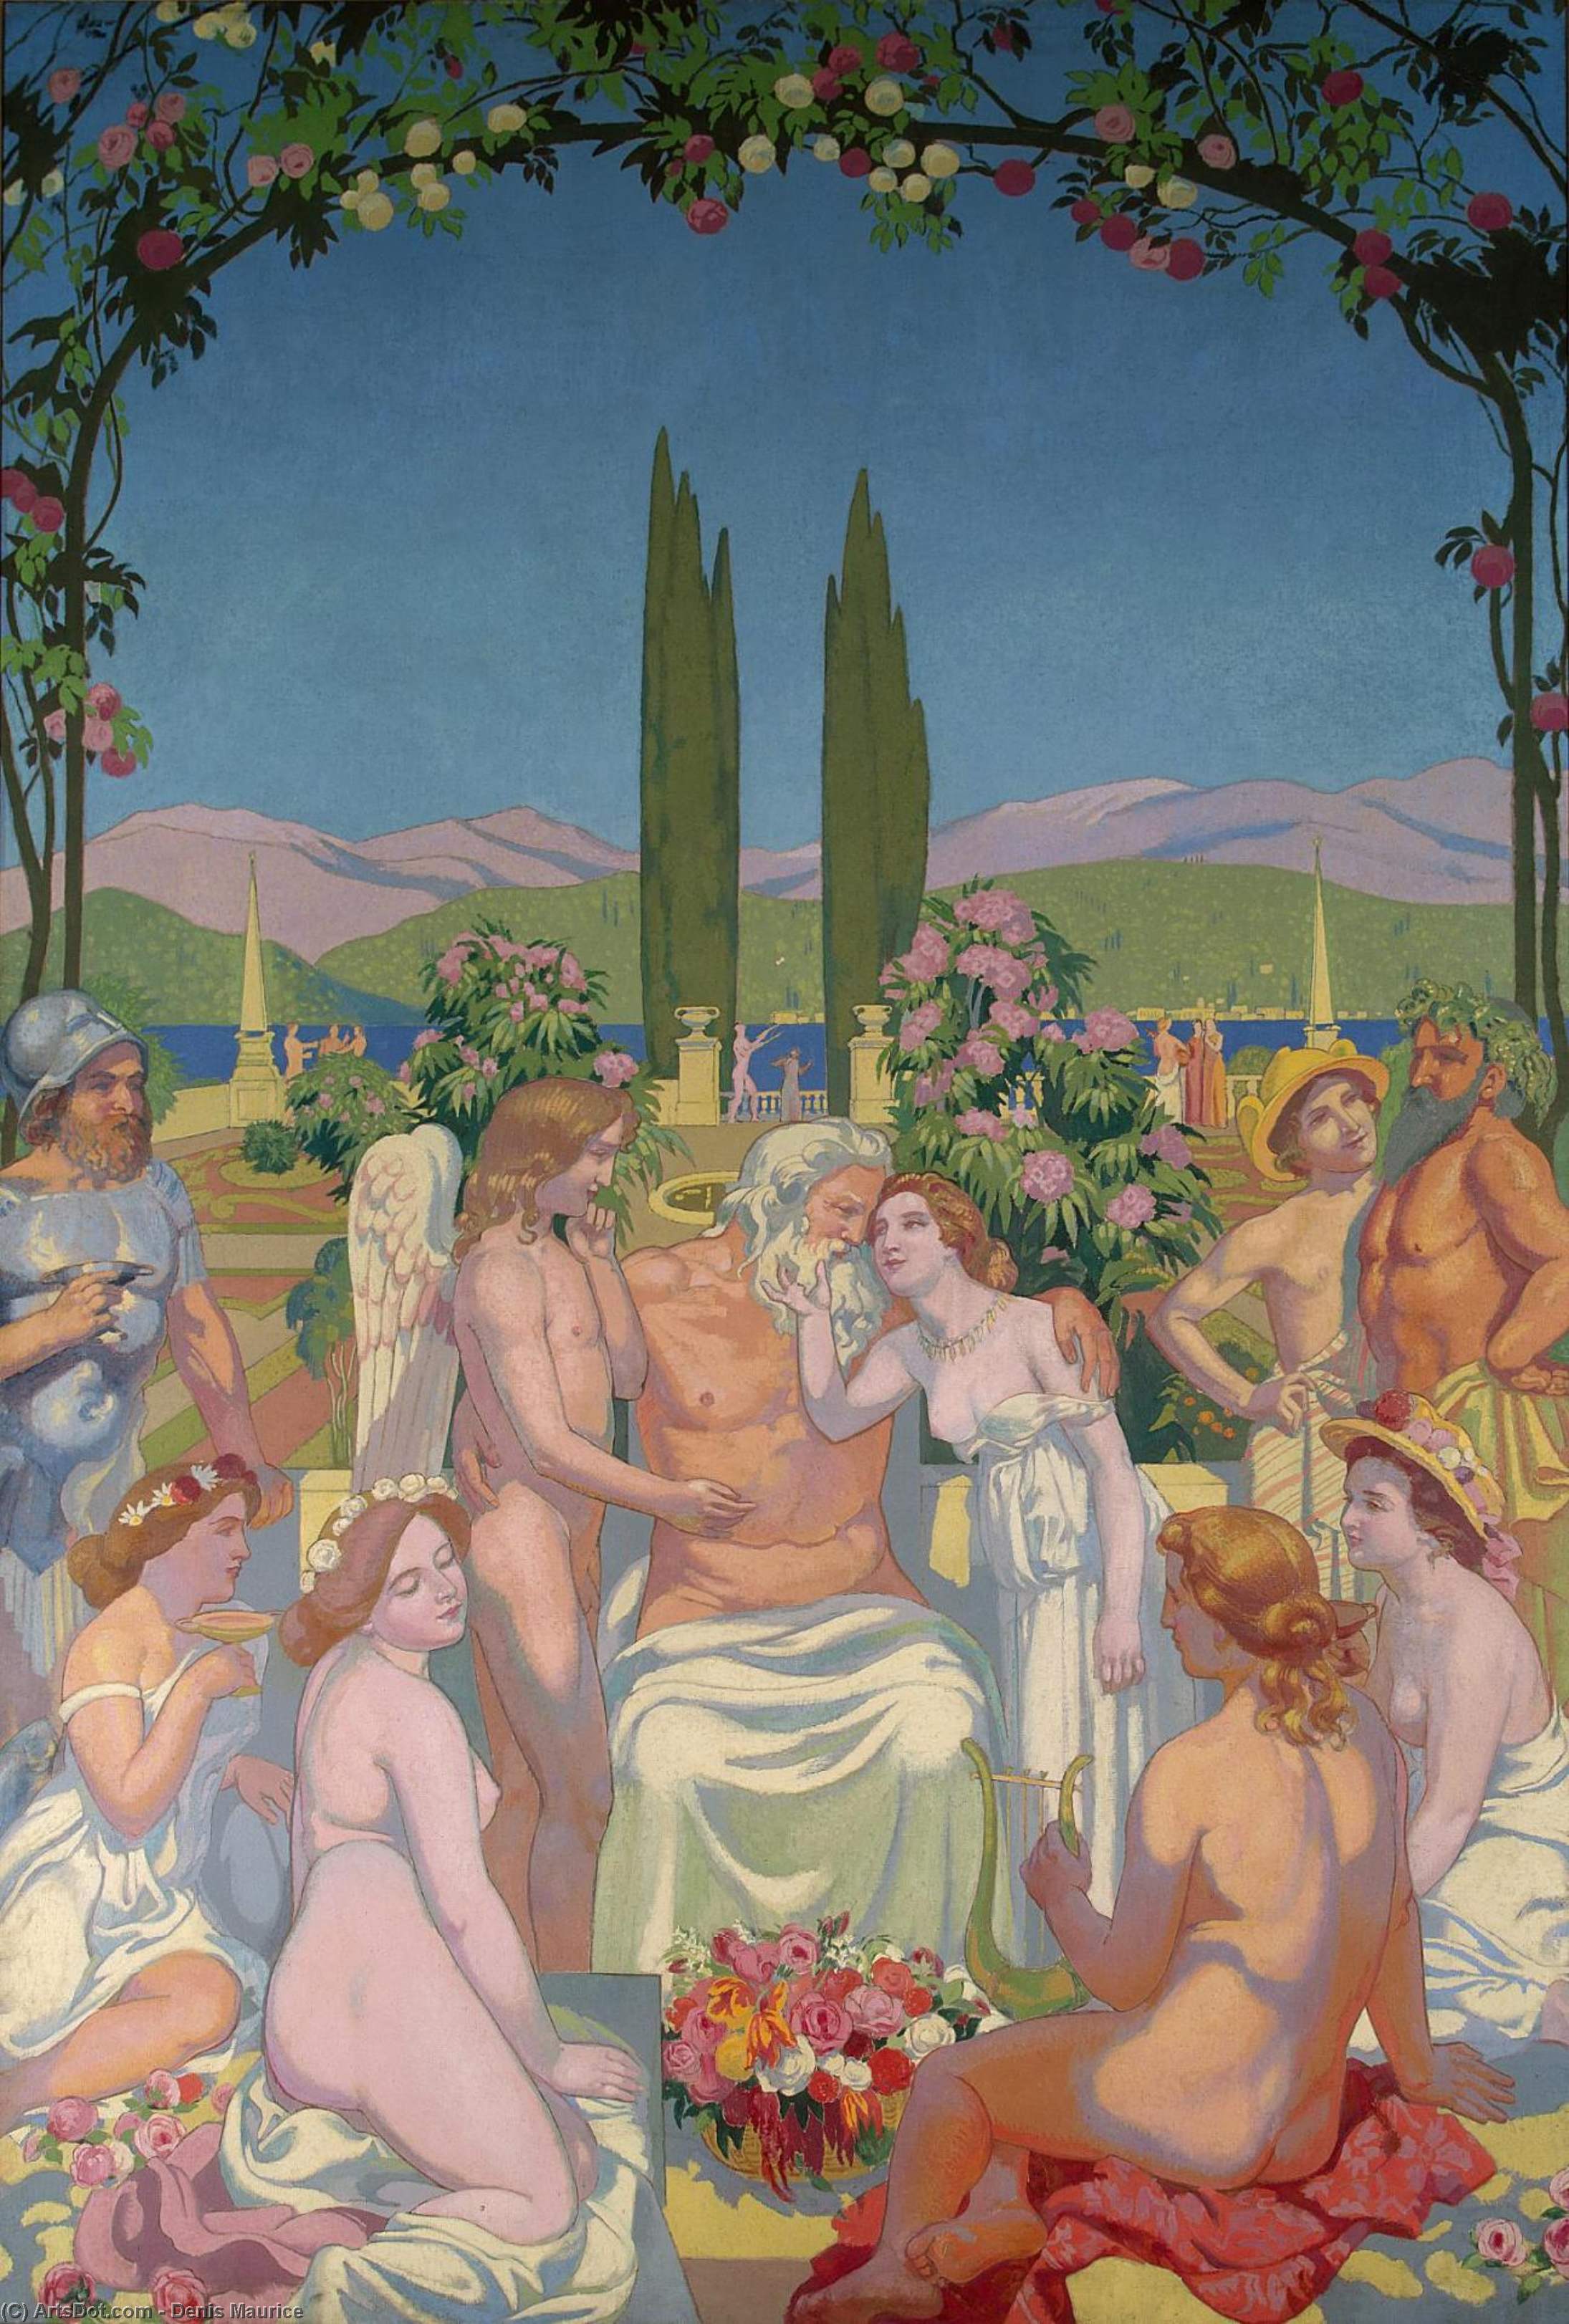 WikiOO.org - Encyclopedia of Fine Arts - Maľba, Artwork Denis Maurice - Panel 5. In the Presence of the Gods Jupiter Bestows Immortality on Psyche and Celebrates Her Marriage to Eros